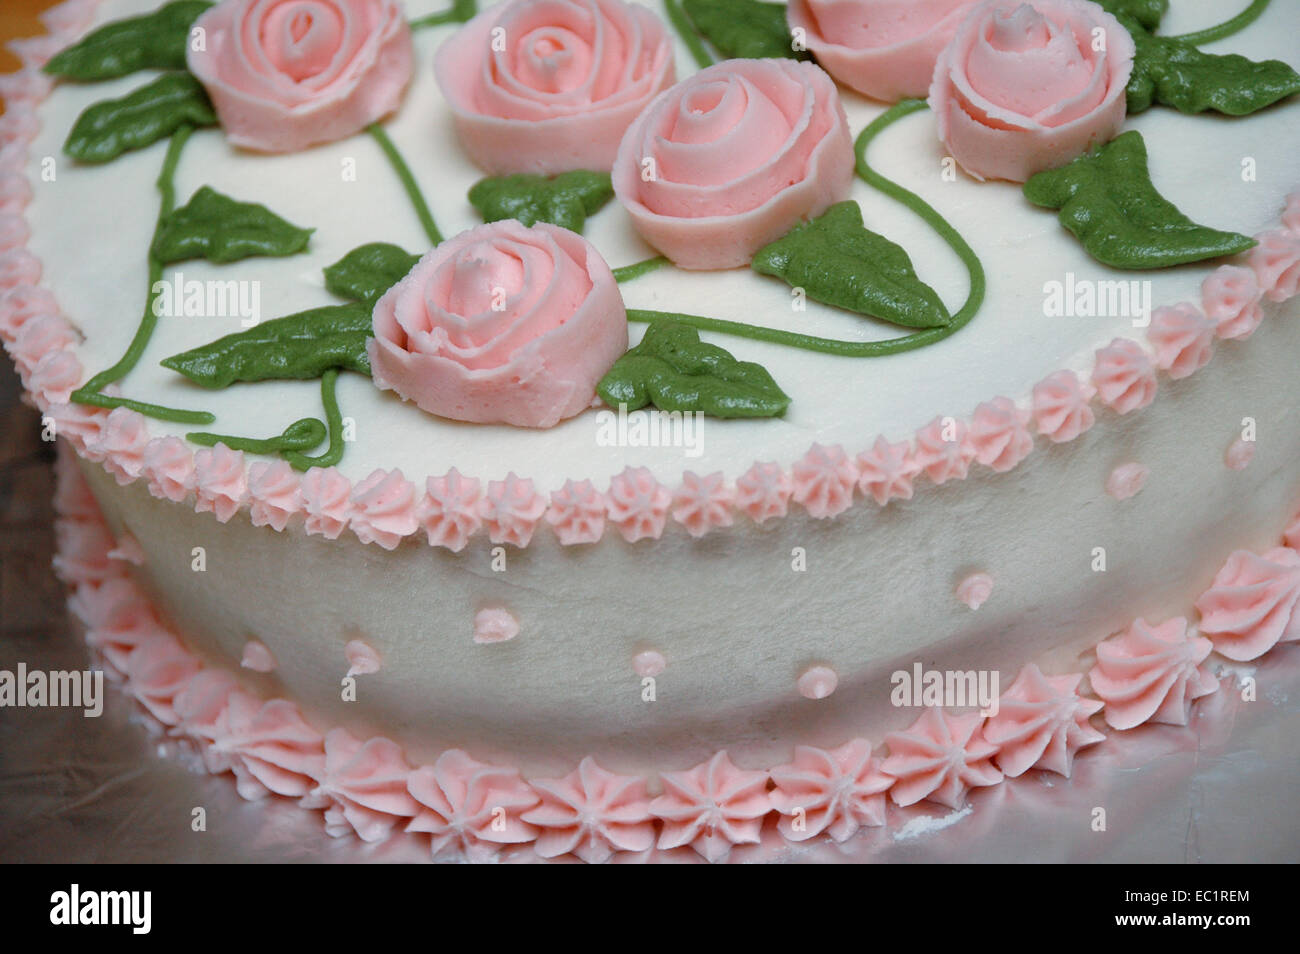 Detail of a cake with icing, icing flowers and leaves. Stock Photo